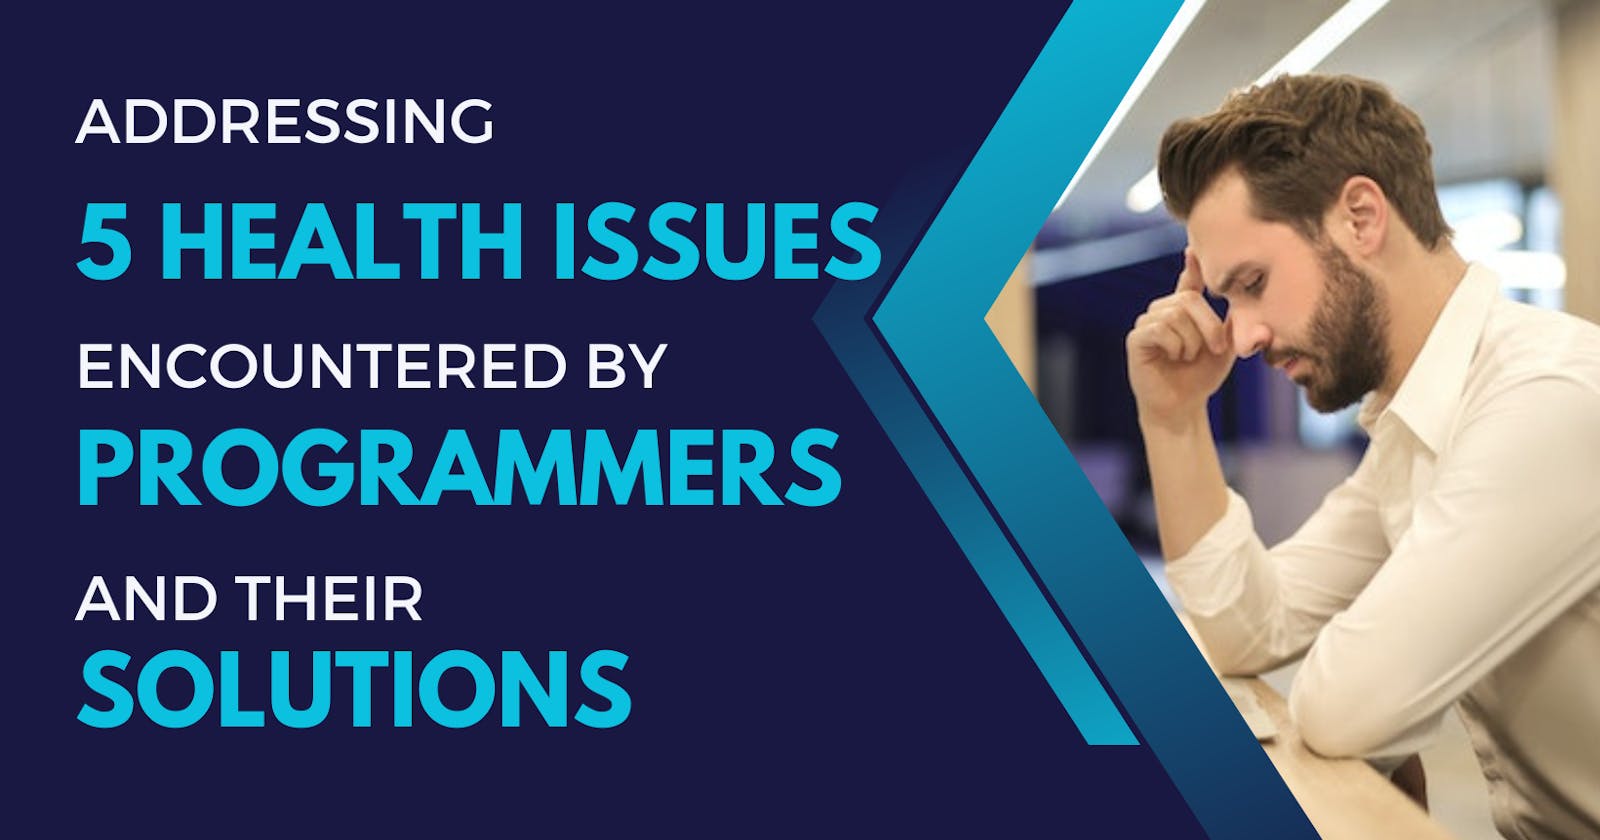 Addressing 5 Health Issues Encountered by Programmers and Their Solutions